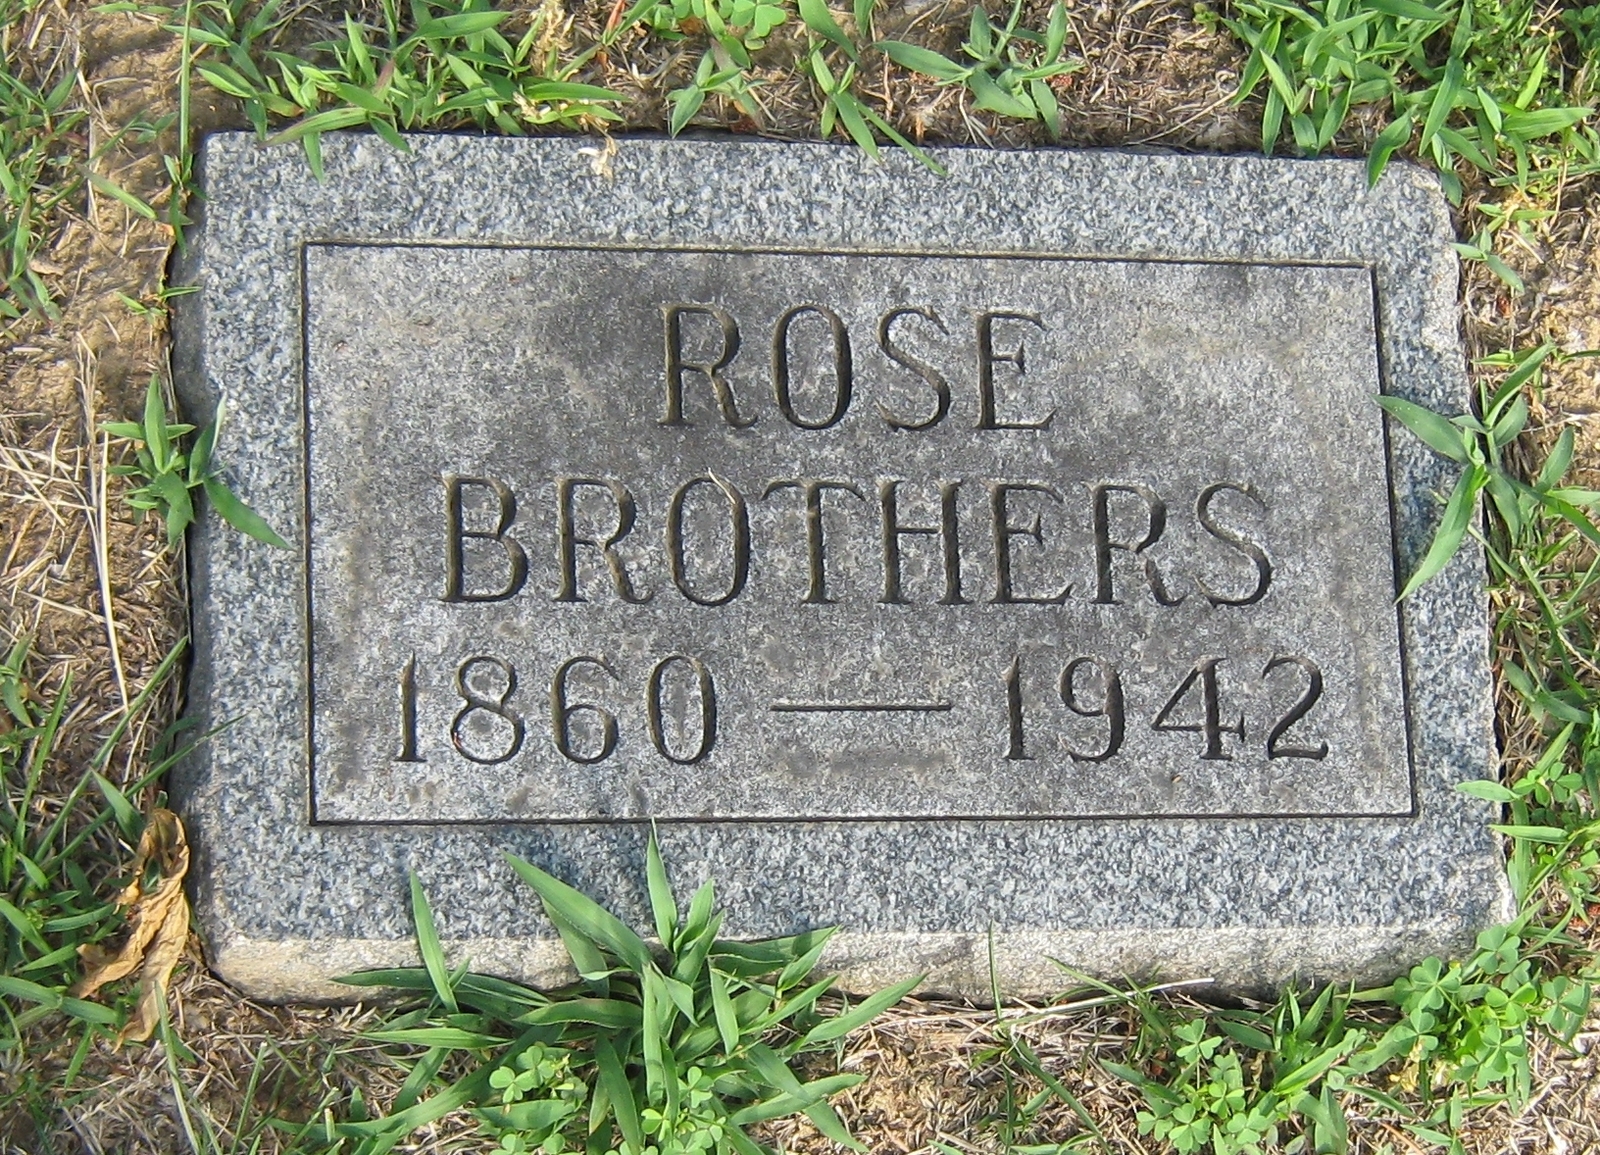 Rose Brothers